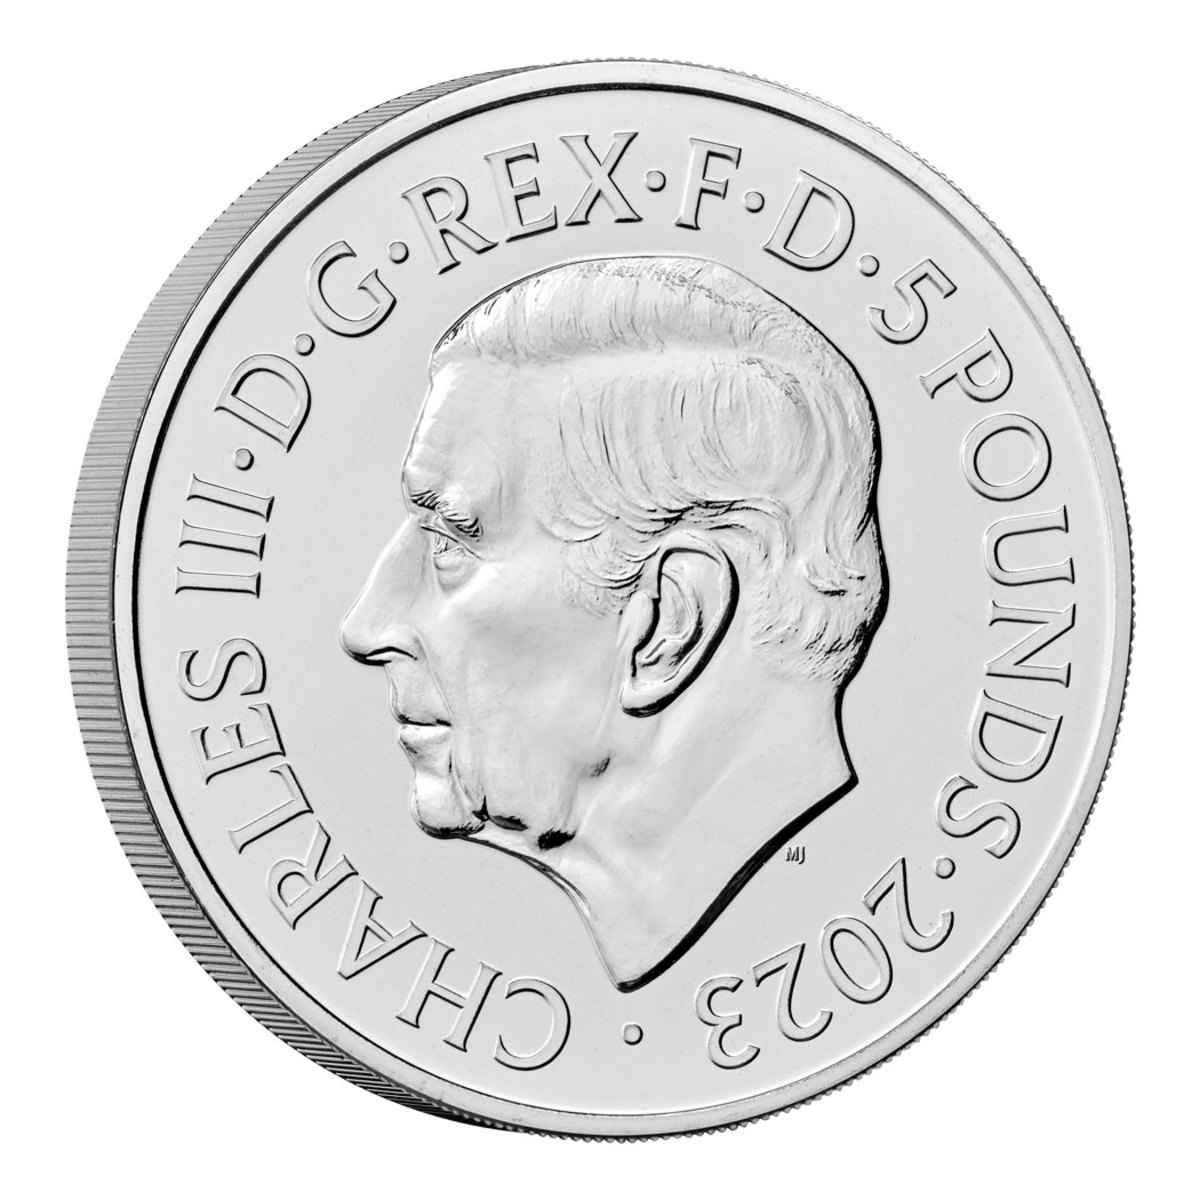 The Royal Mint Reveals First Coins of 2023 Bearing His Majesty The King